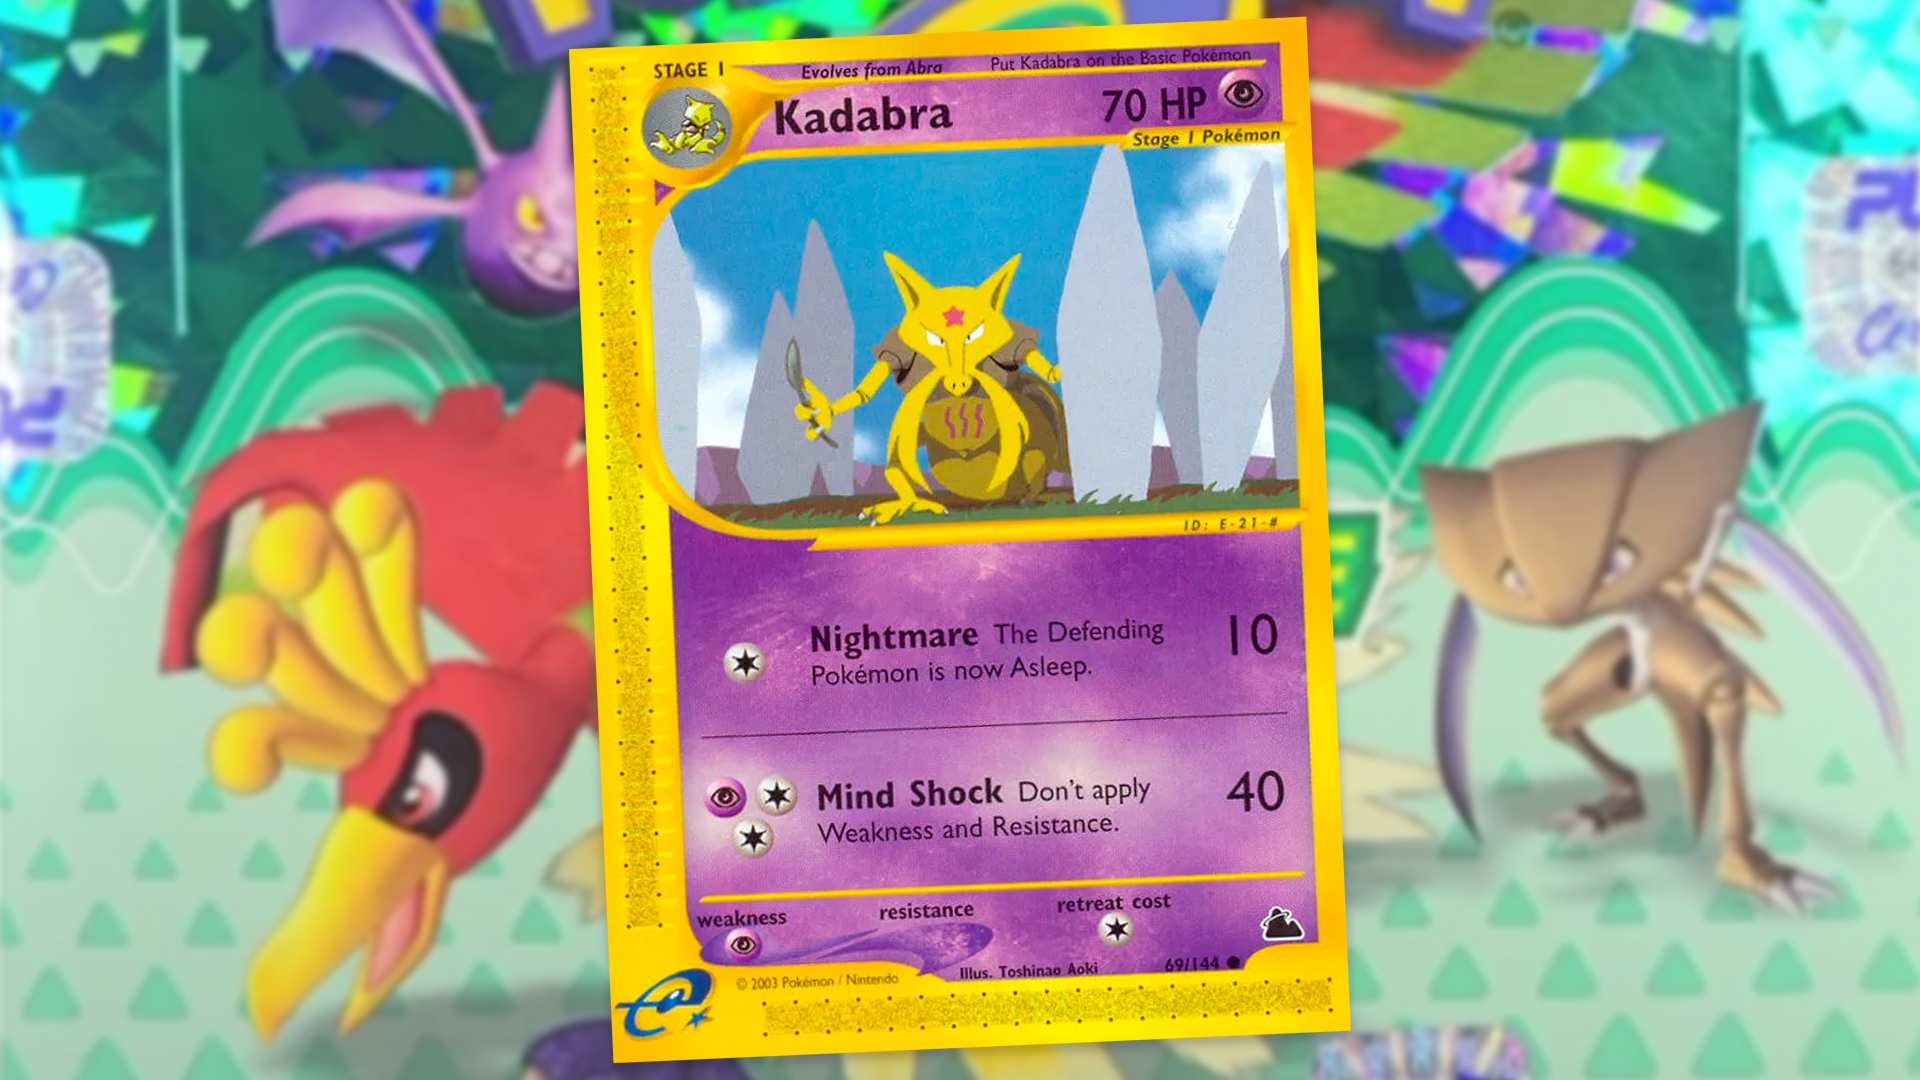 Historic 2003 Pokémon booster box featuring last Kadabra appearance before  20-year Uri Geller ban appears at auction | Dicebreaker